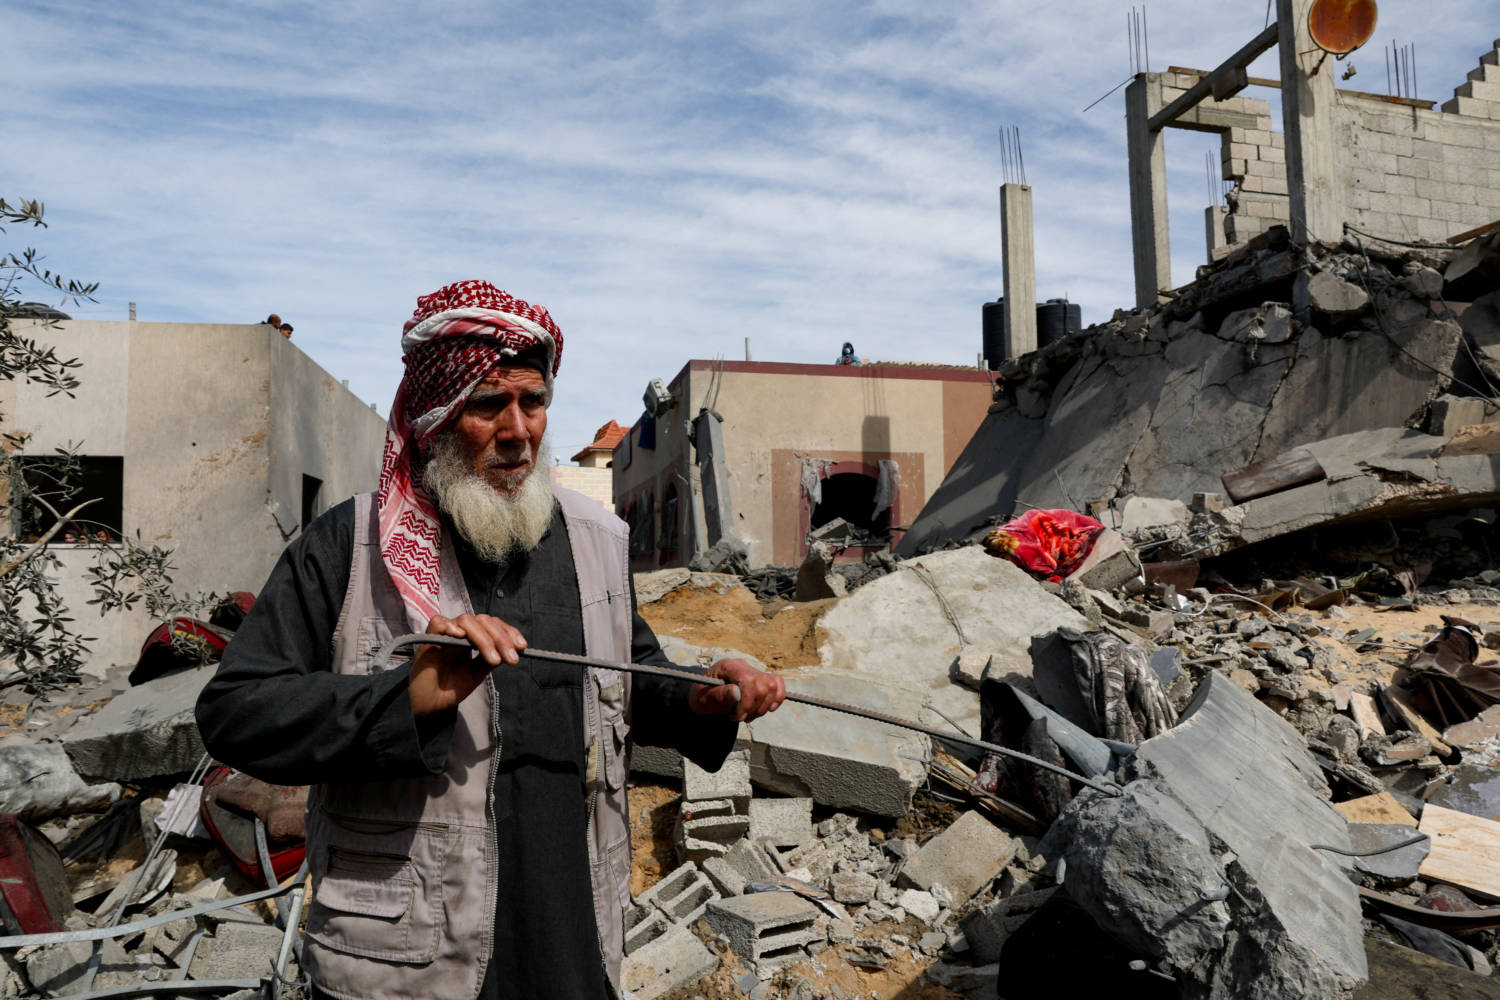 Palestinians Gather At The Site Of An Israeli Strike On A House, In Rafah